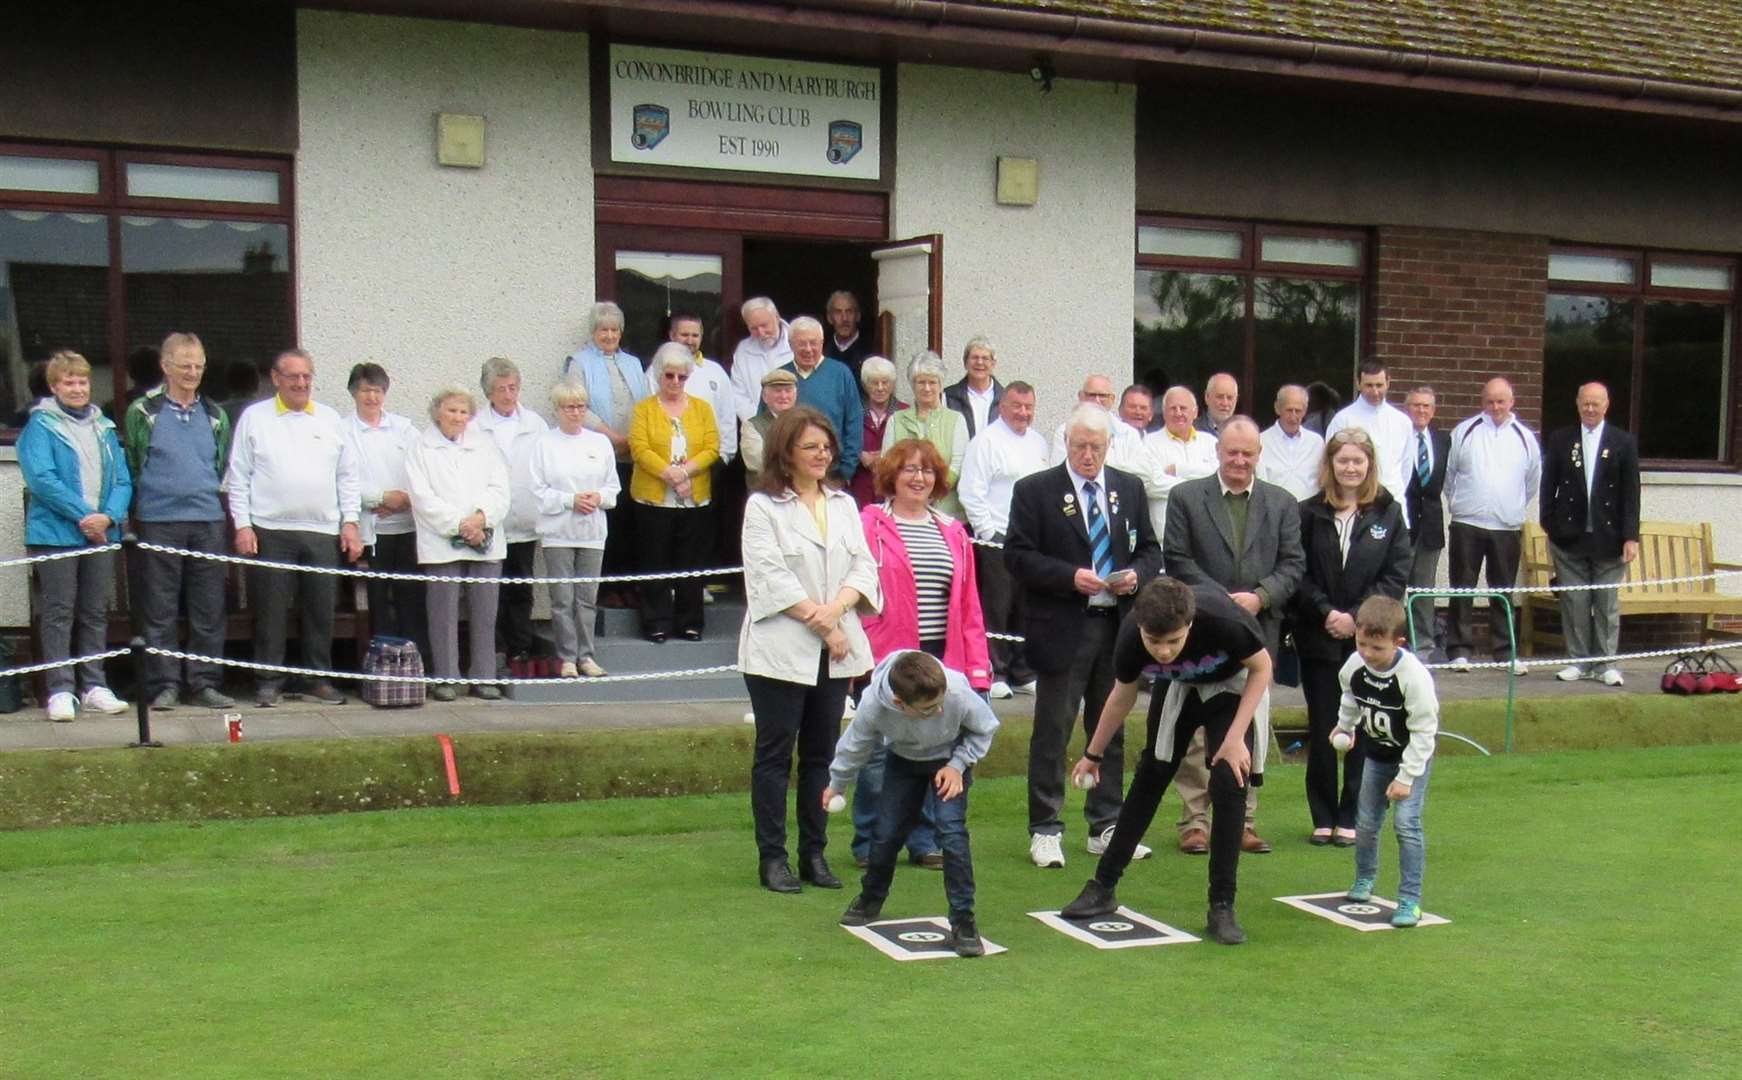 Conon/Maryburgh Bowling Club says it will look to get back into action once the Scottish Government gives the go-ahead, which is expected to be today.